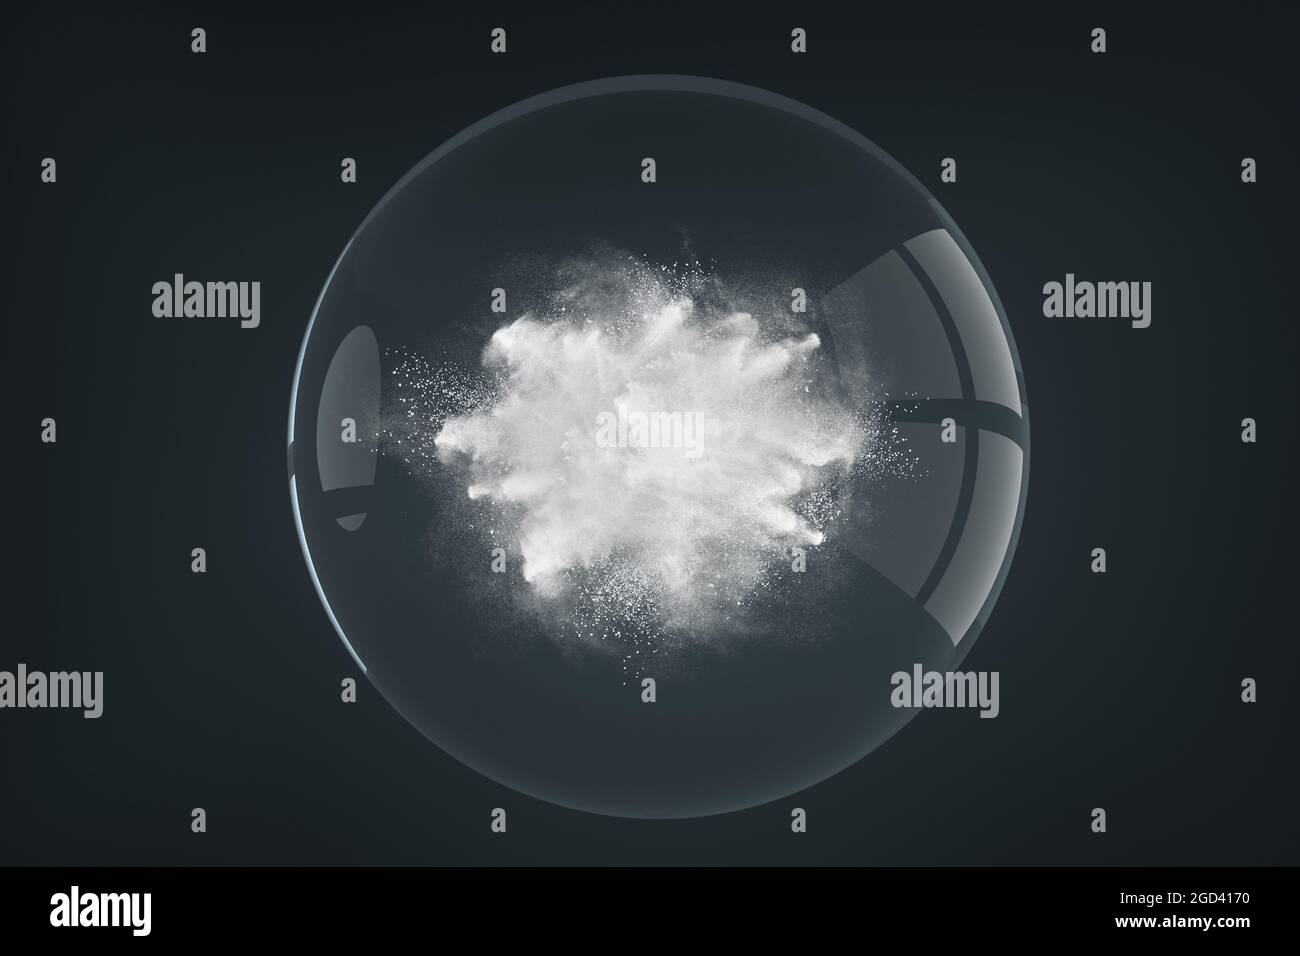 Abstract design of powder or smoke particles cloud explosion on dark background inside the transparent glass sphere Stock Photo